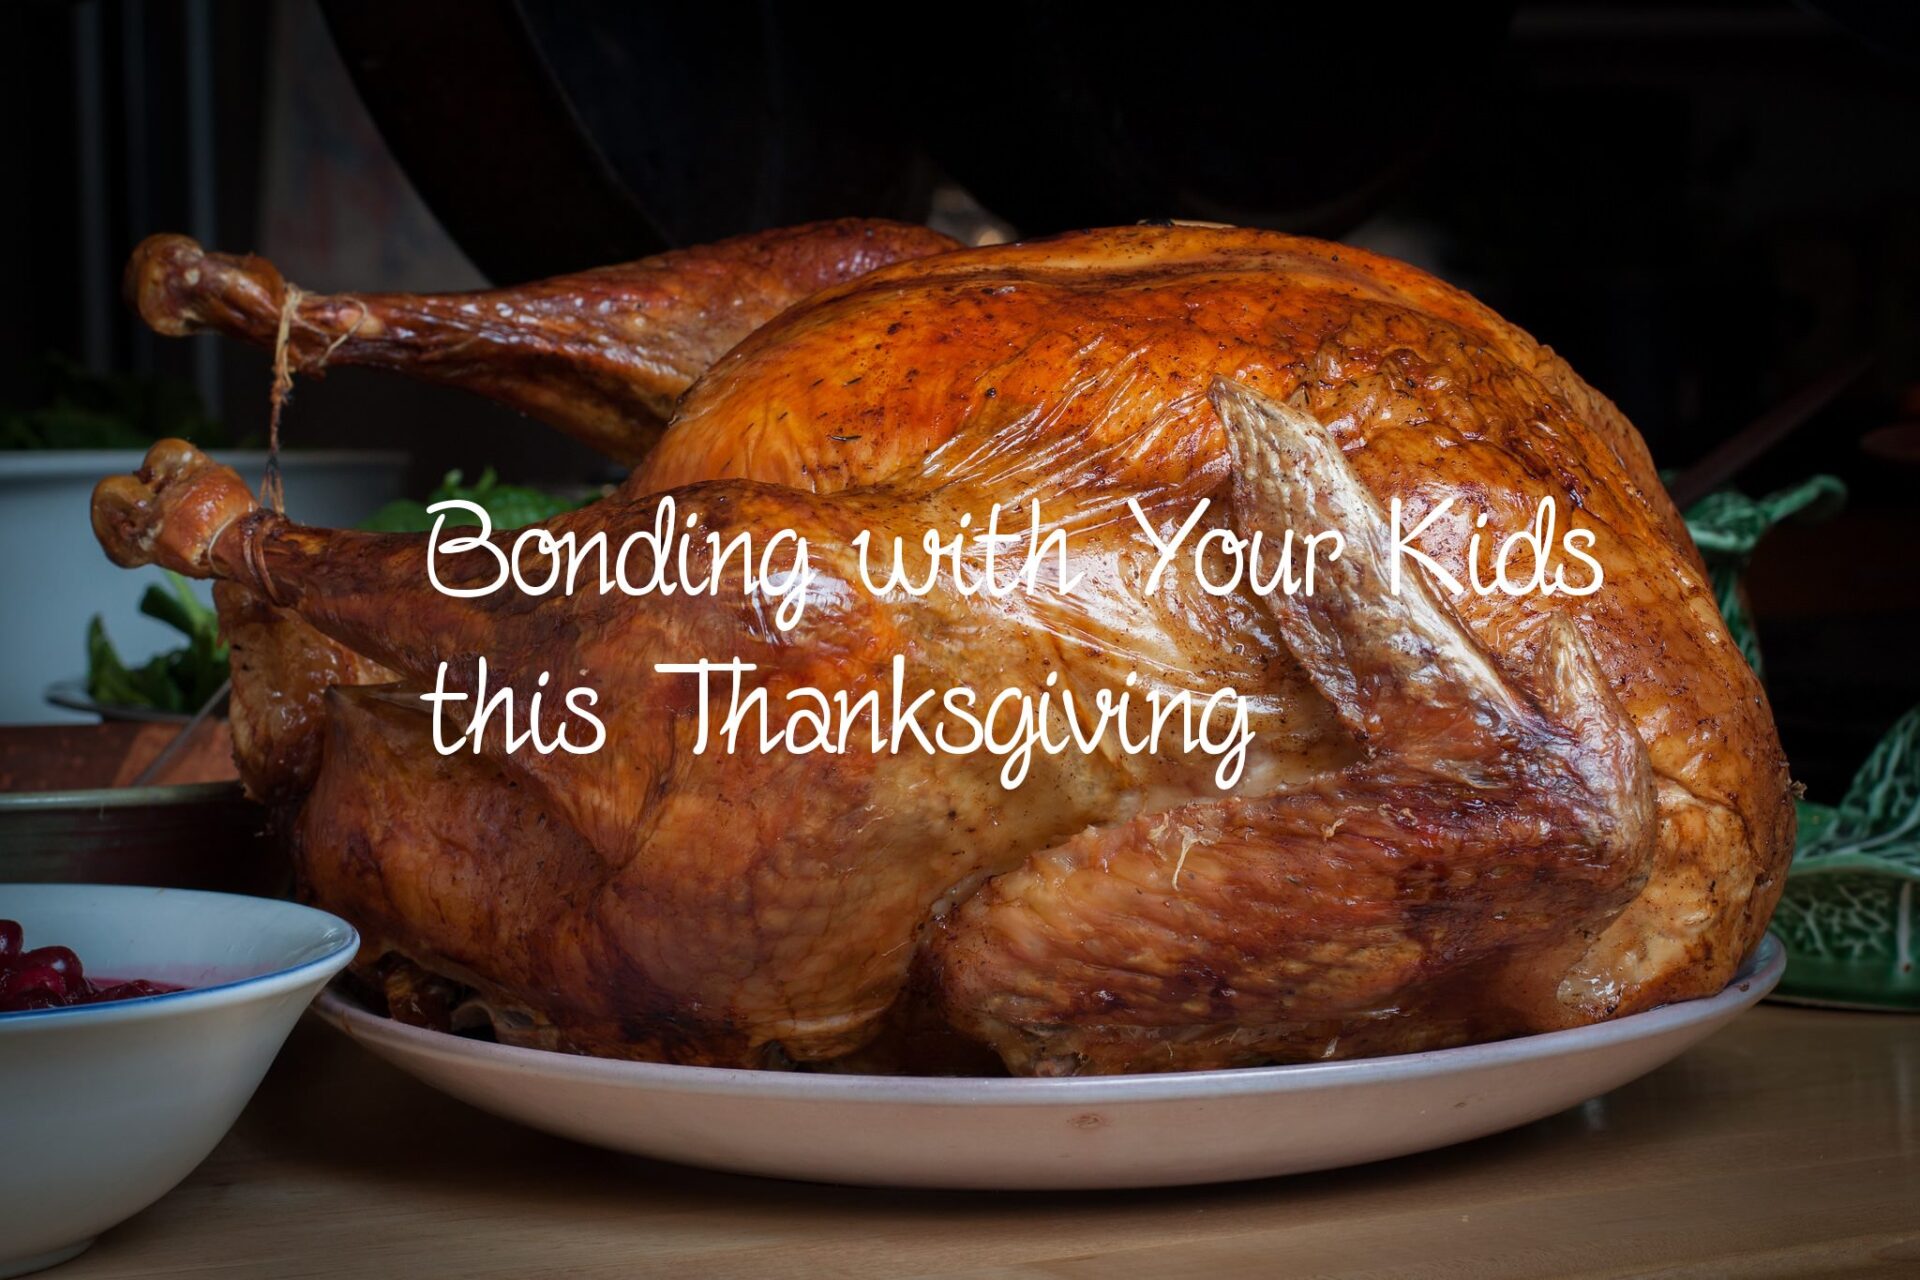 Bonding with your kids this Thanksgiving